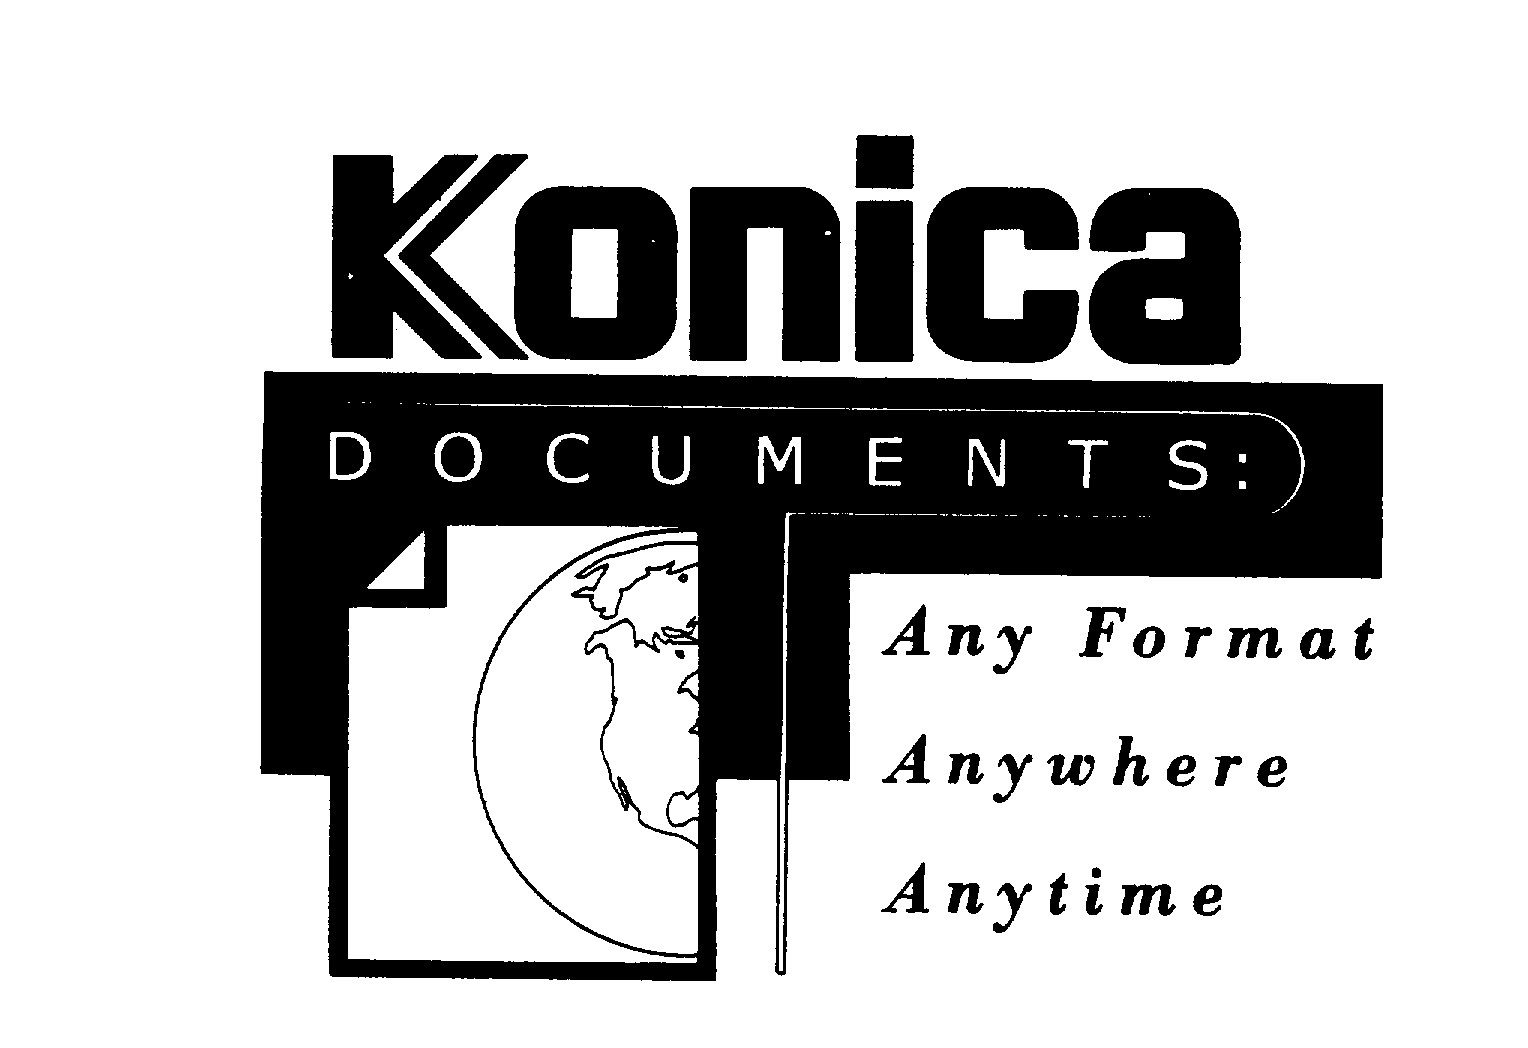  KONICA DOCUMENTS: ANY FORMAT ANYWHERE ANYTIME